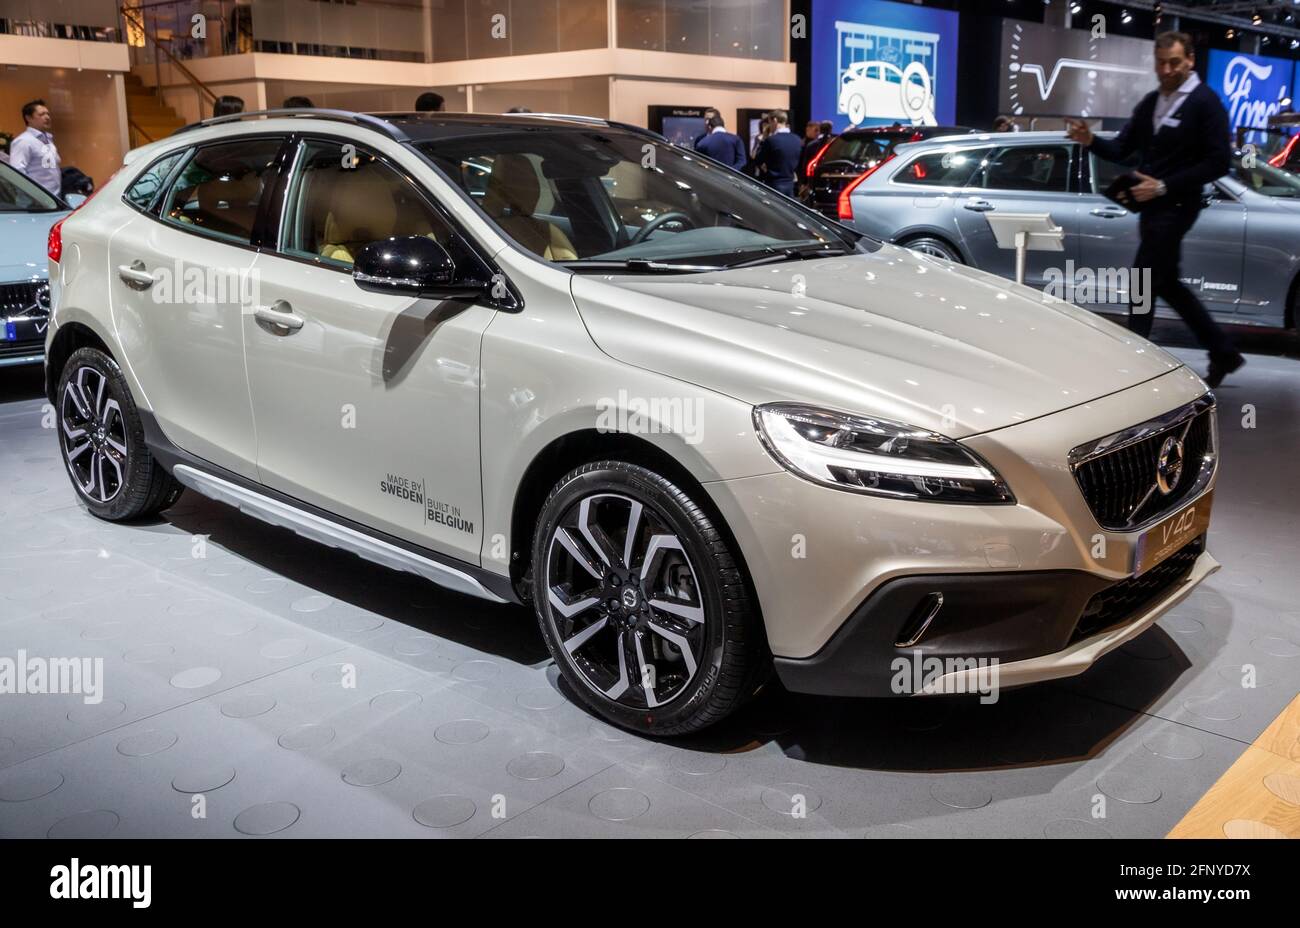 Volvo V40 Cross Country car showcased at the Brussels Expo Autosalon motor  show. Belgium - January 19, 2017 Stock Photo - Alamy